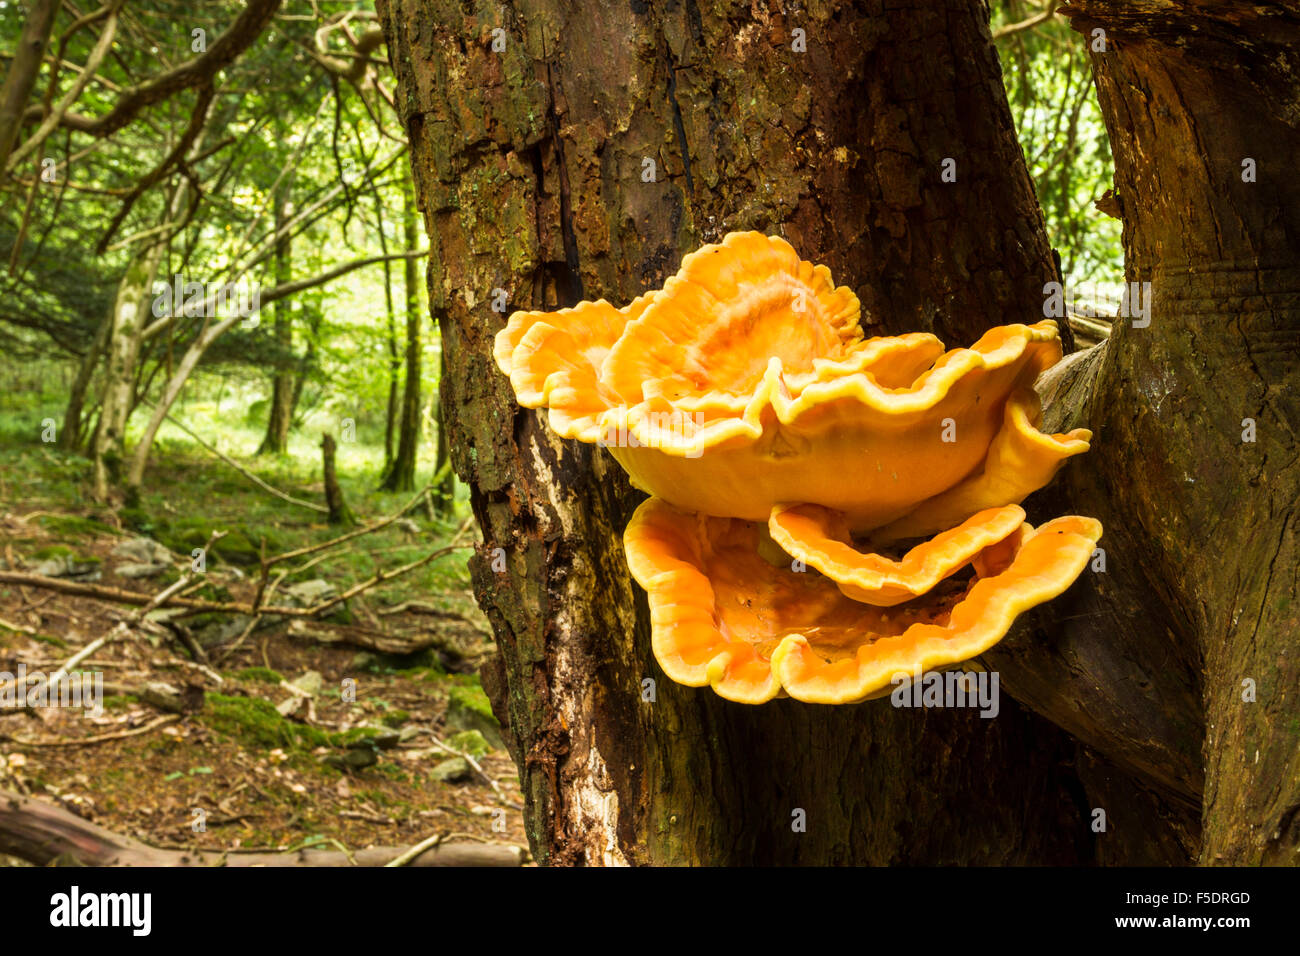 Chicken of the woods bracket fungus growing from tree in woodland or forest. Stock Photo